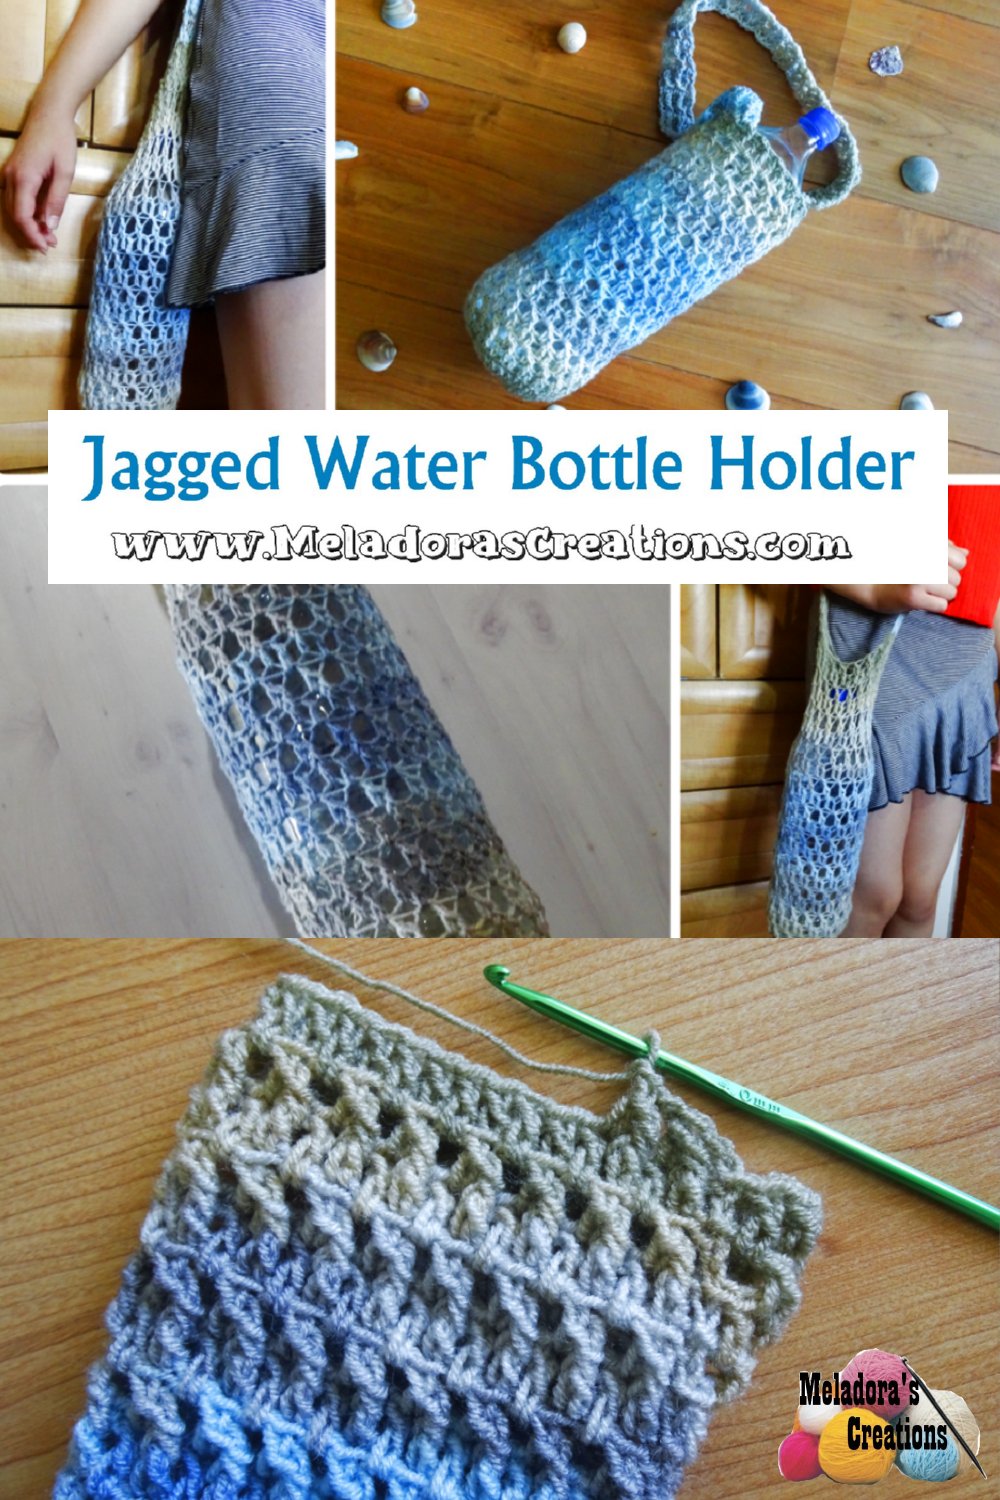 Jagged Crochet Water Bottle Holder Pattern and Video tutorial